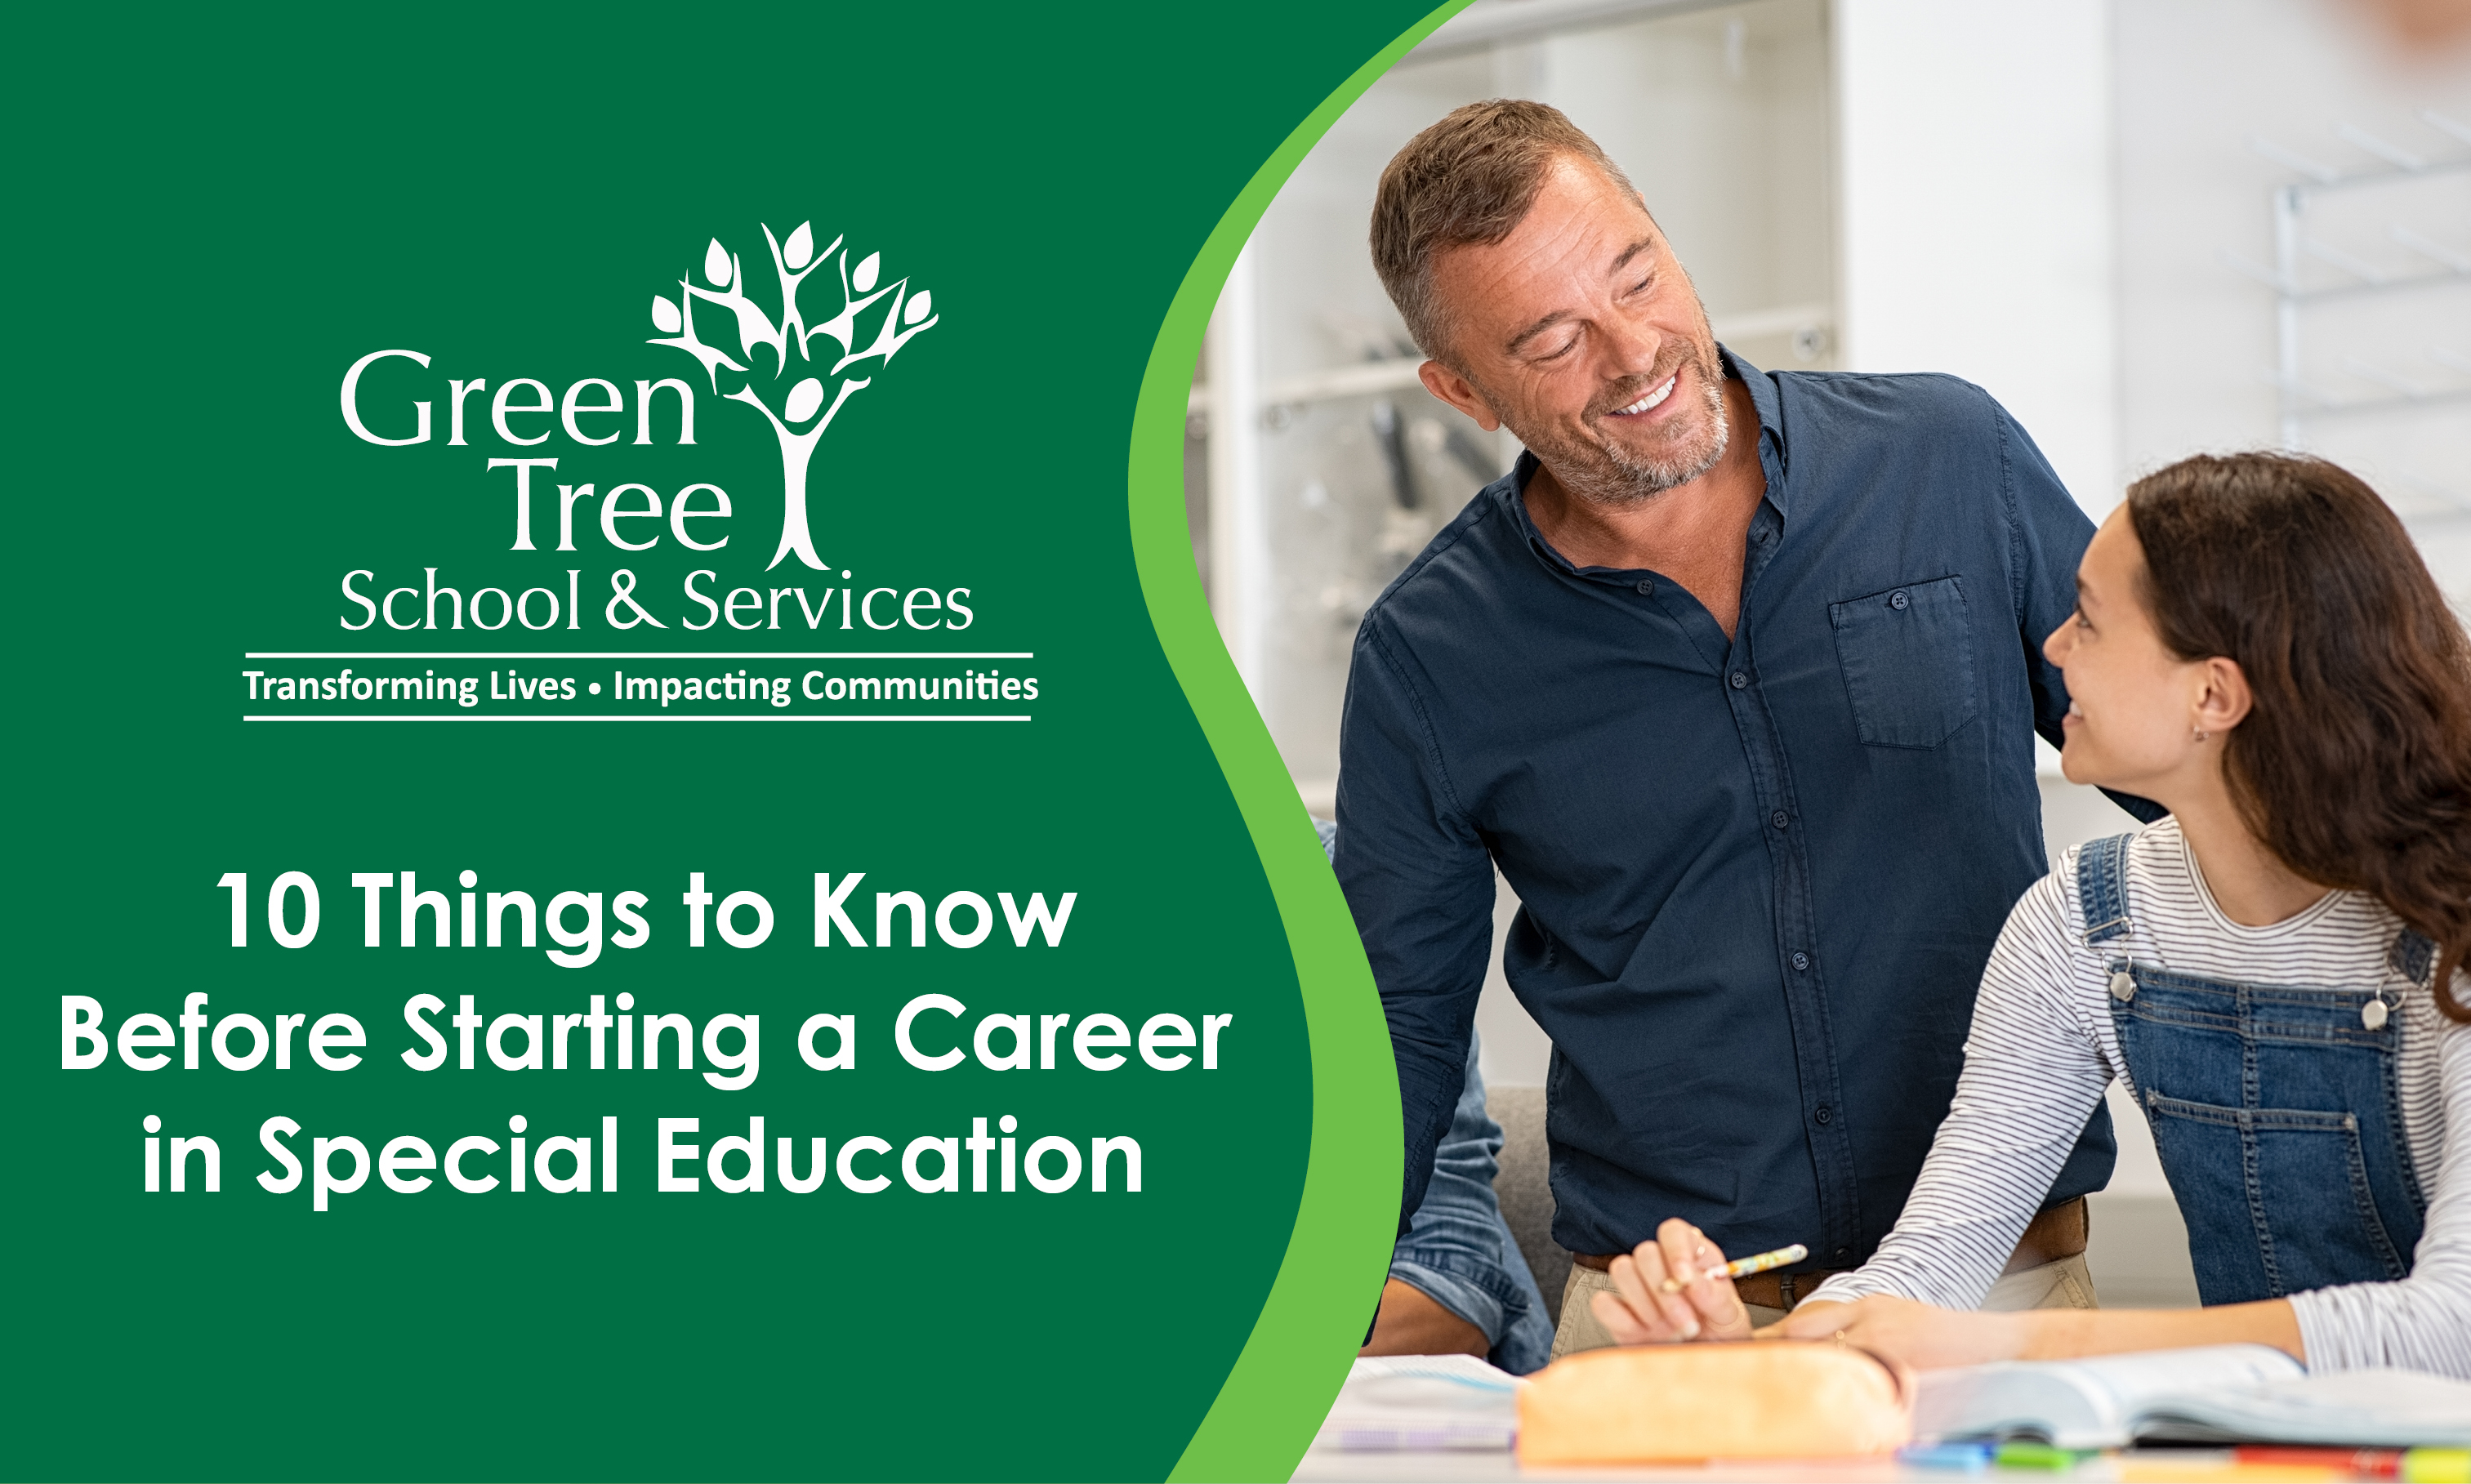 10 Things to Know Before Starting a Career in Special Education